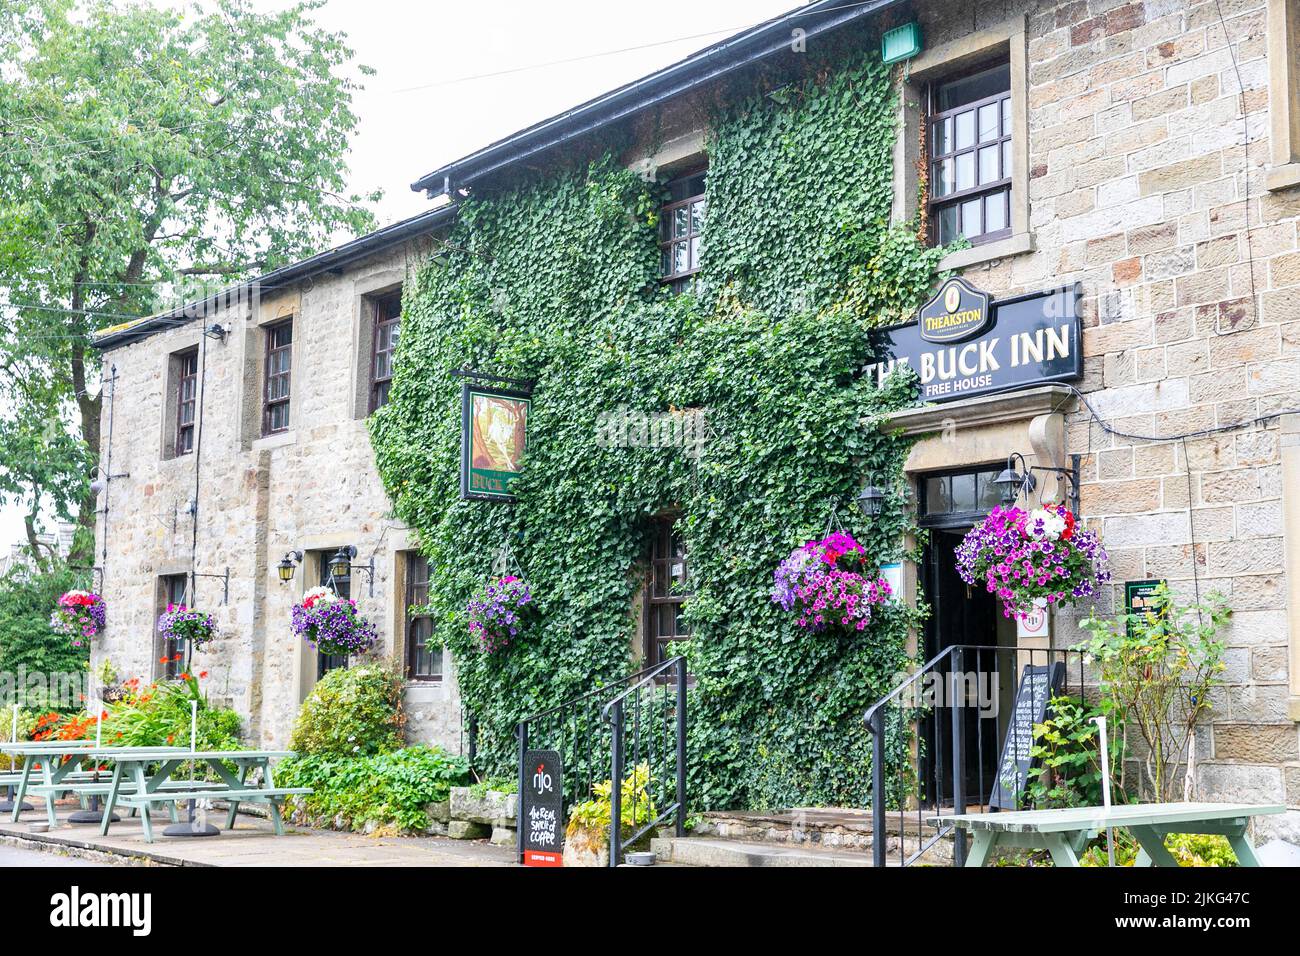 The Buck Inn pub and restaurant in the Yorkshire village of Buckden, Yorkshire Dales,England,Uk summers day 2022 Stock Photo